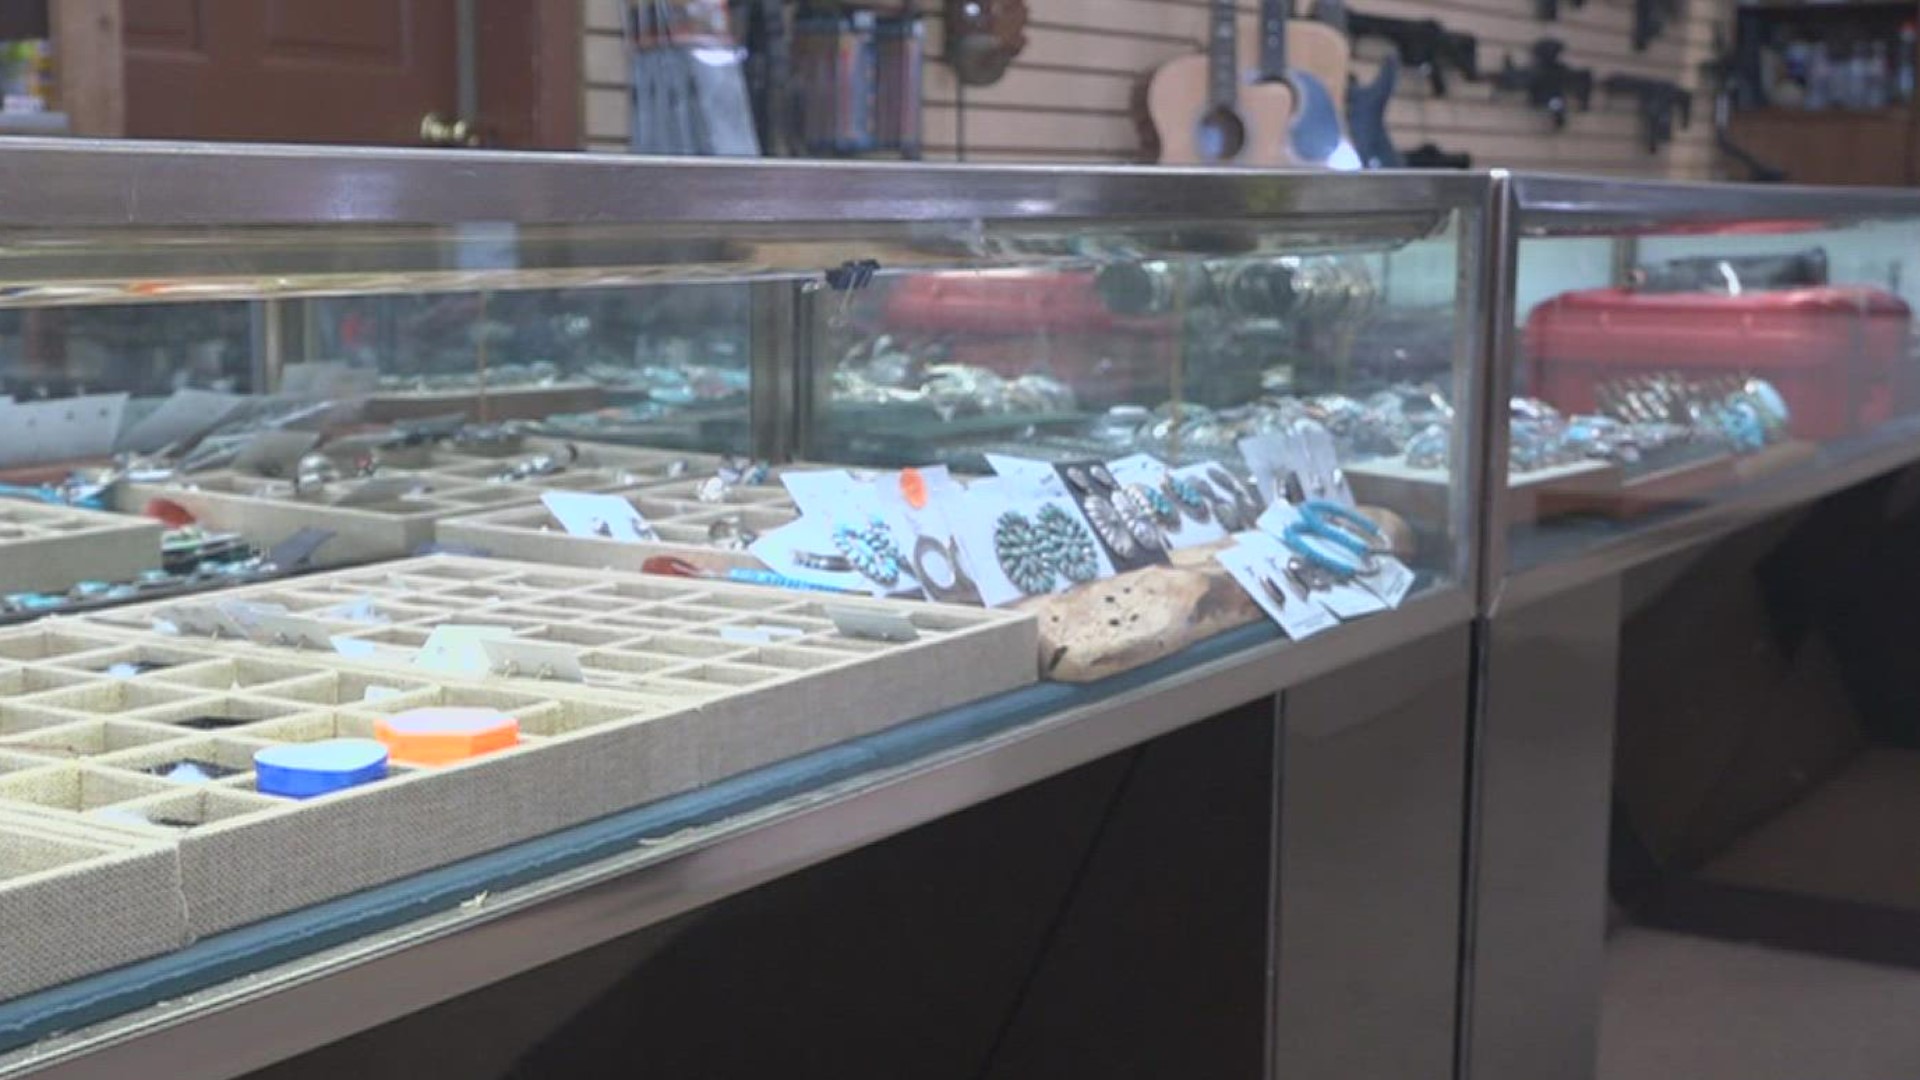 With prices skyrocketing, many residents are turning to pawn shops to make a quick buck.